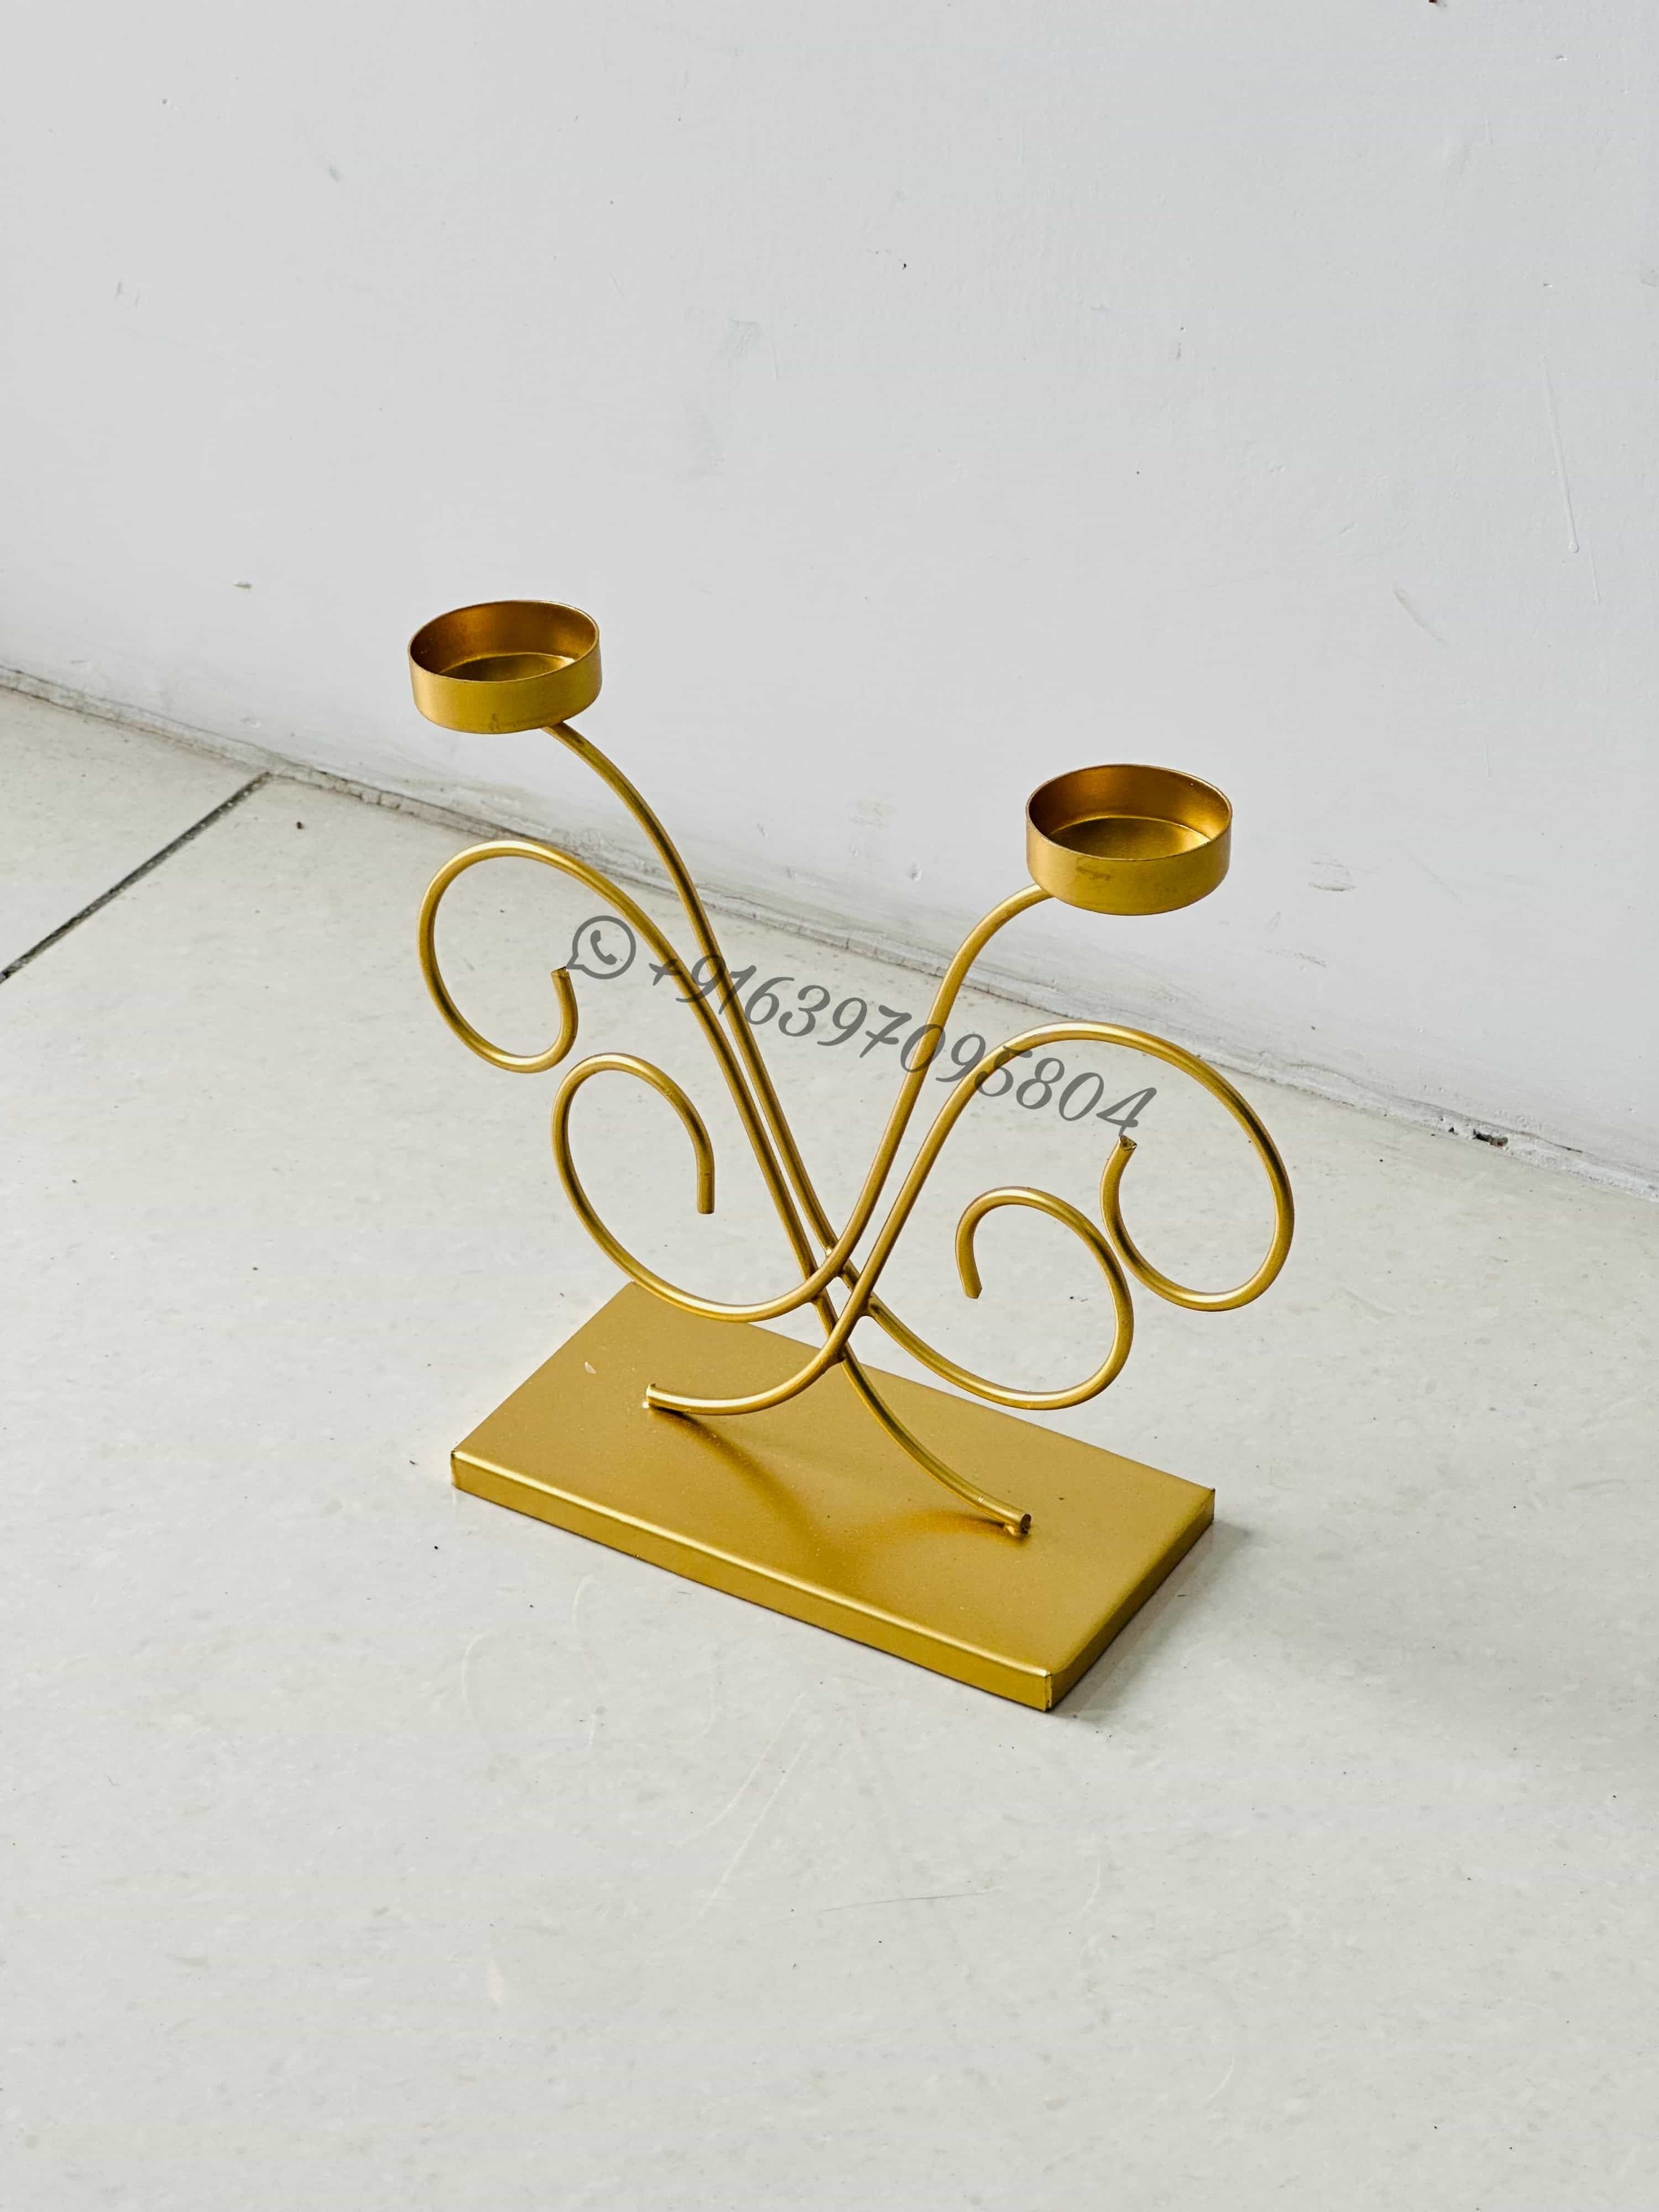 GCO Tea Light Stand aka Candle stand in iron with golden powder coated finish